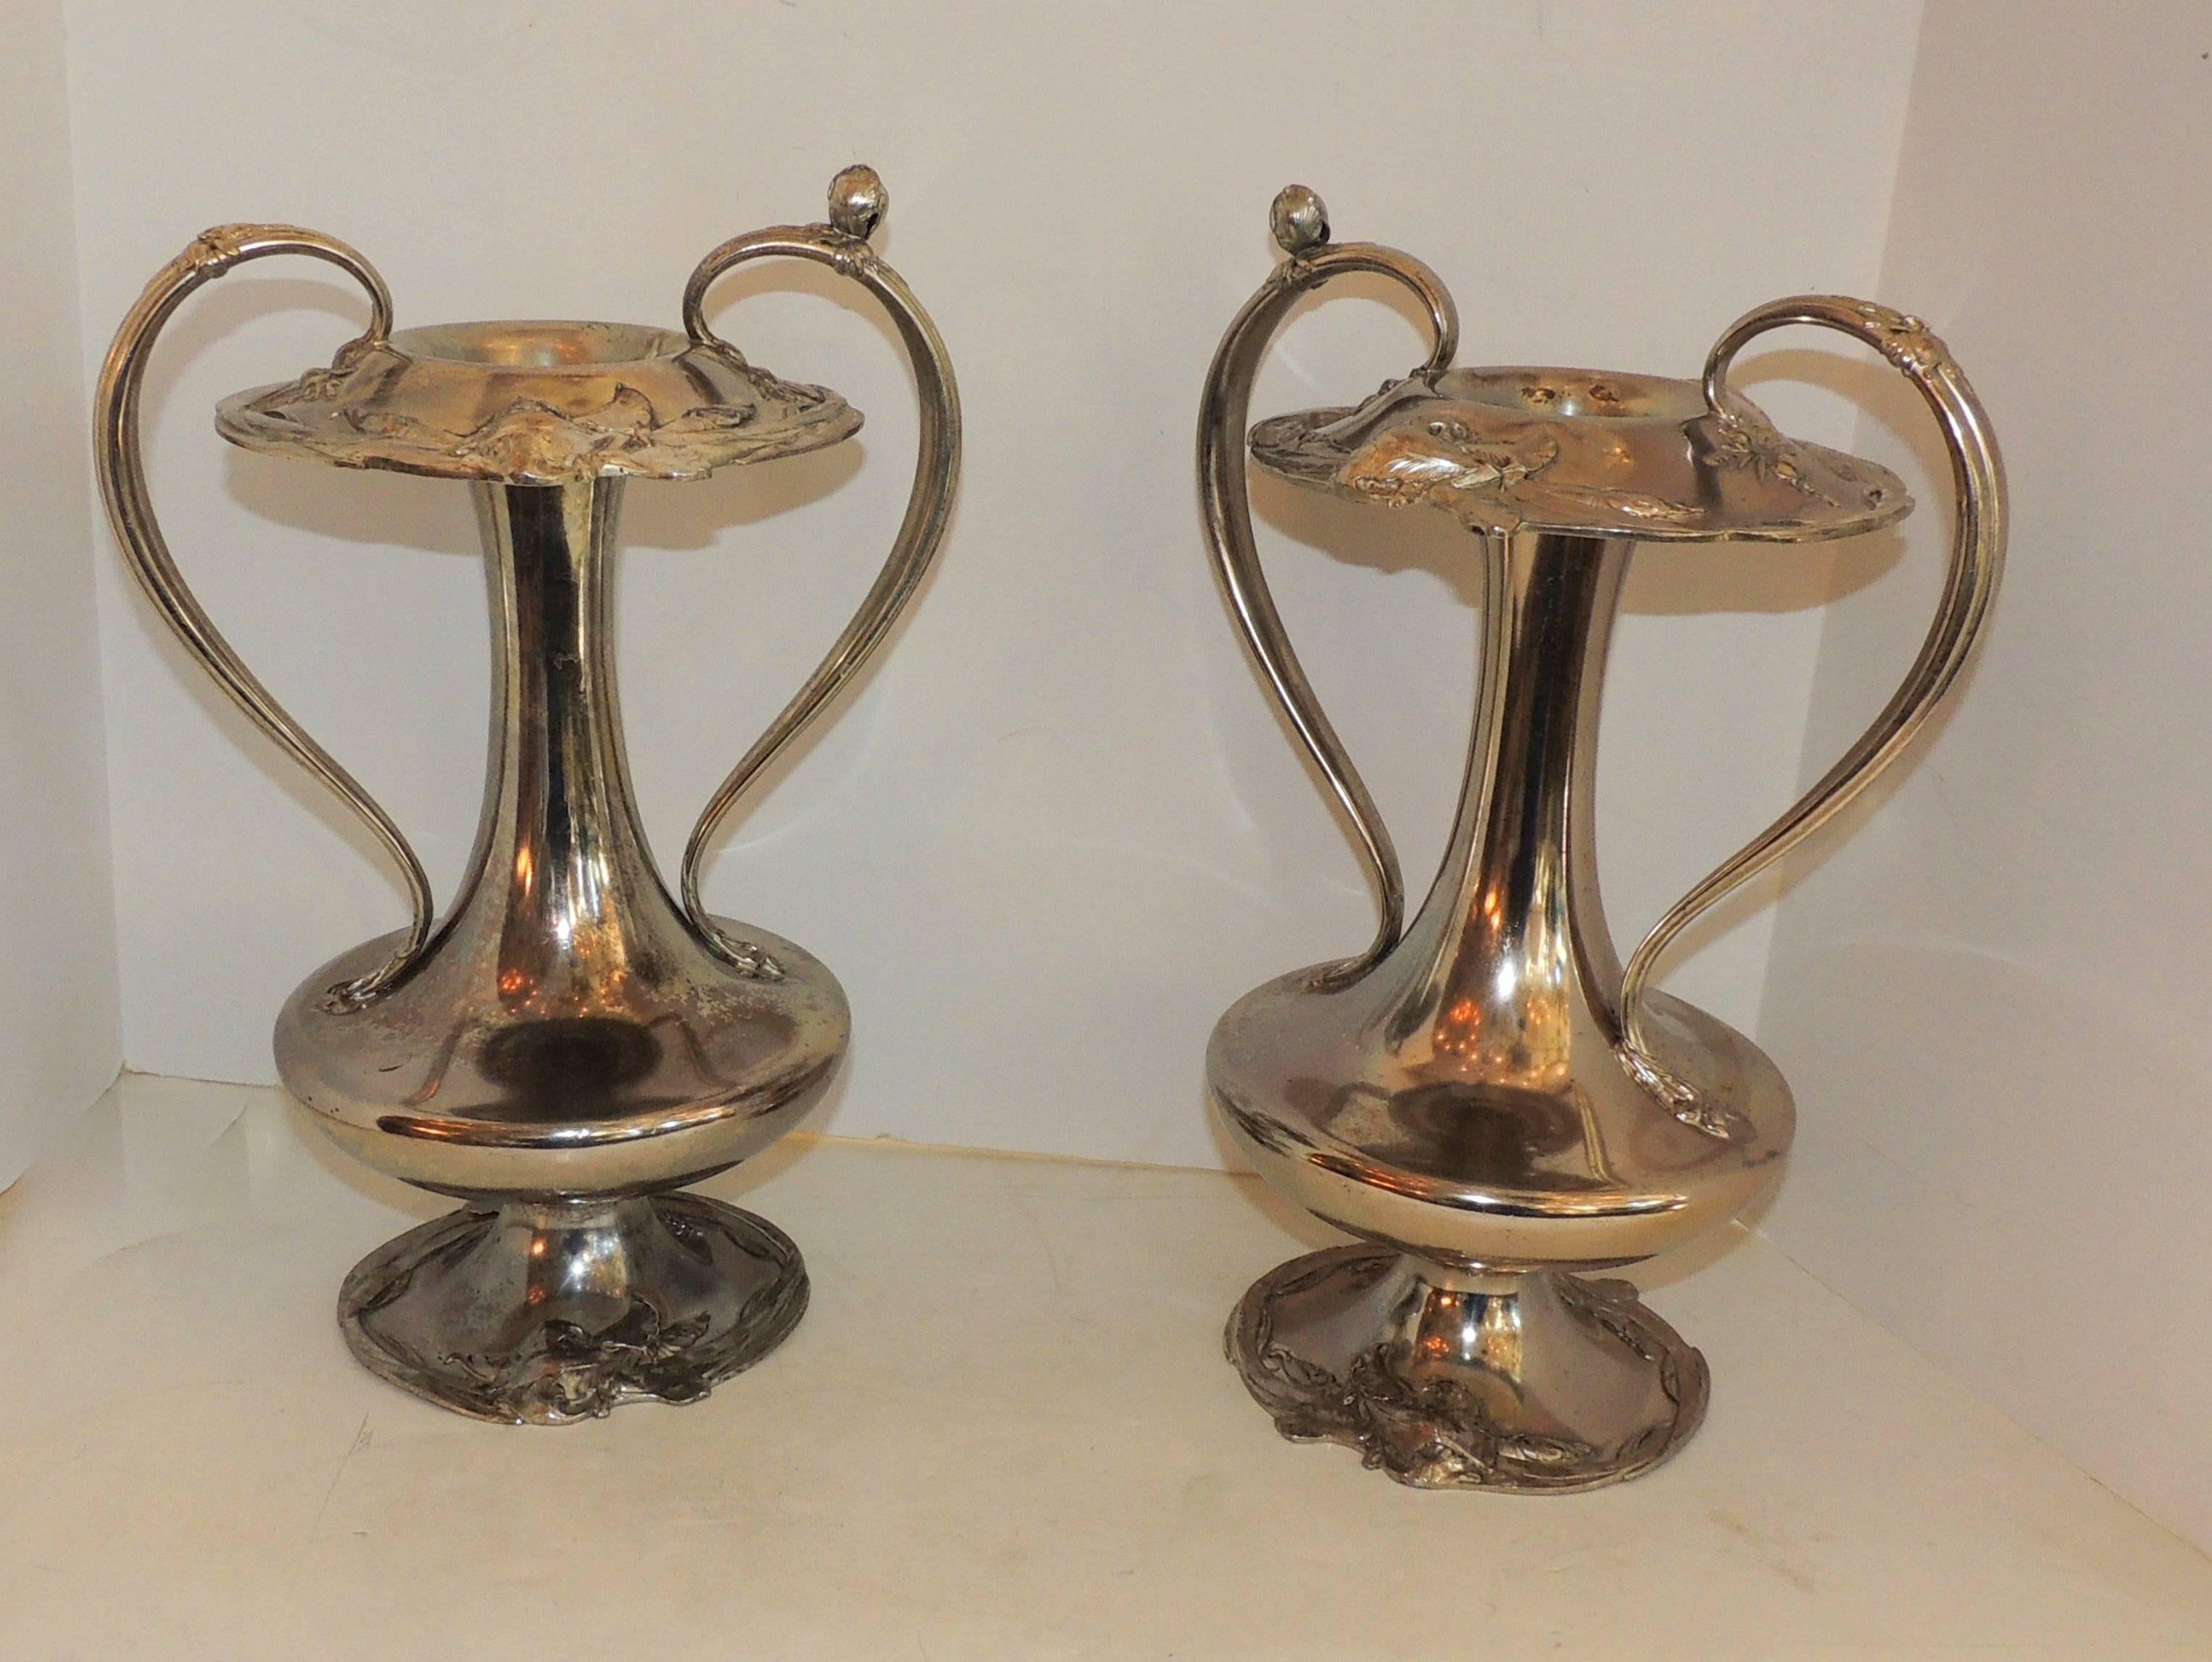 A fine large pair of Reed & Barton Art Nouveau form silver plate urn vases with handle in the manner of WMF. 

Measures: 14 x 9.5.